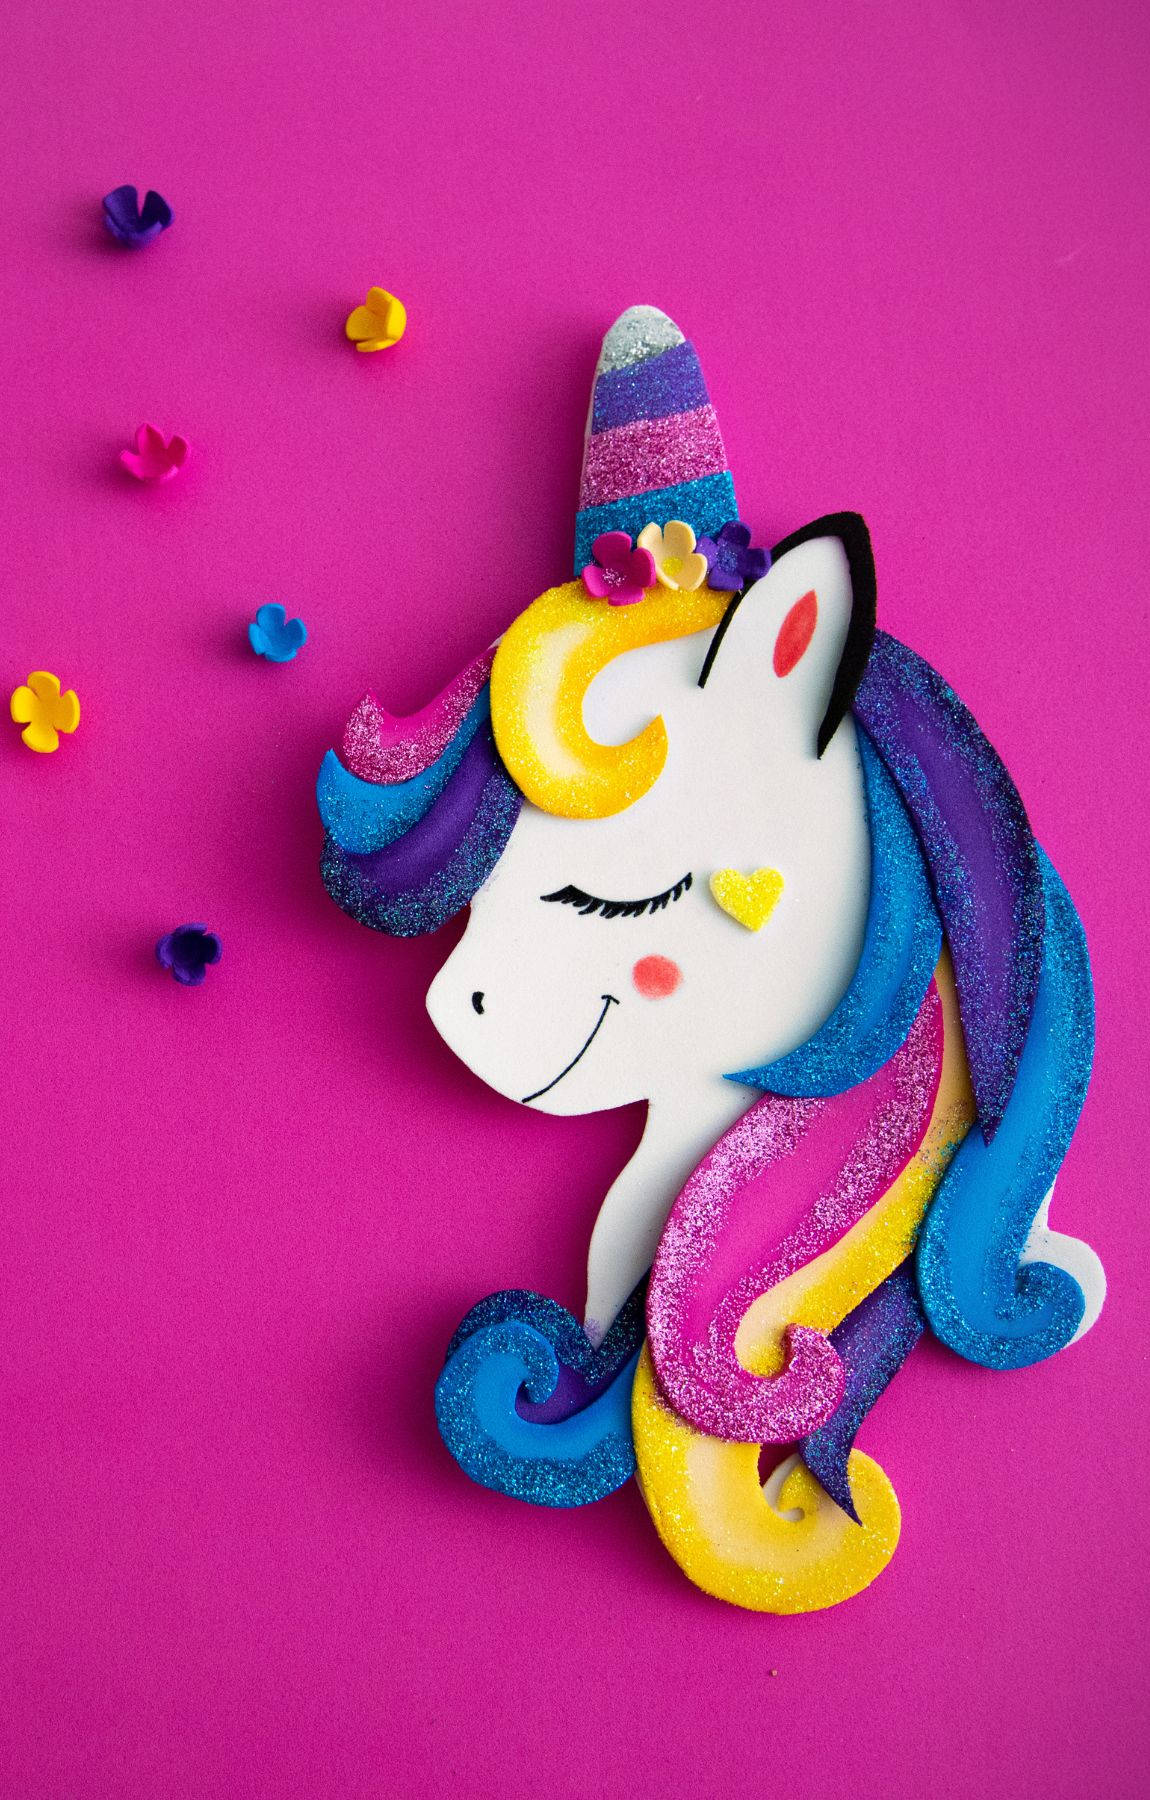 Showcasing the one-of-a-kind beauty of a Cool Unicorn Wallpaper